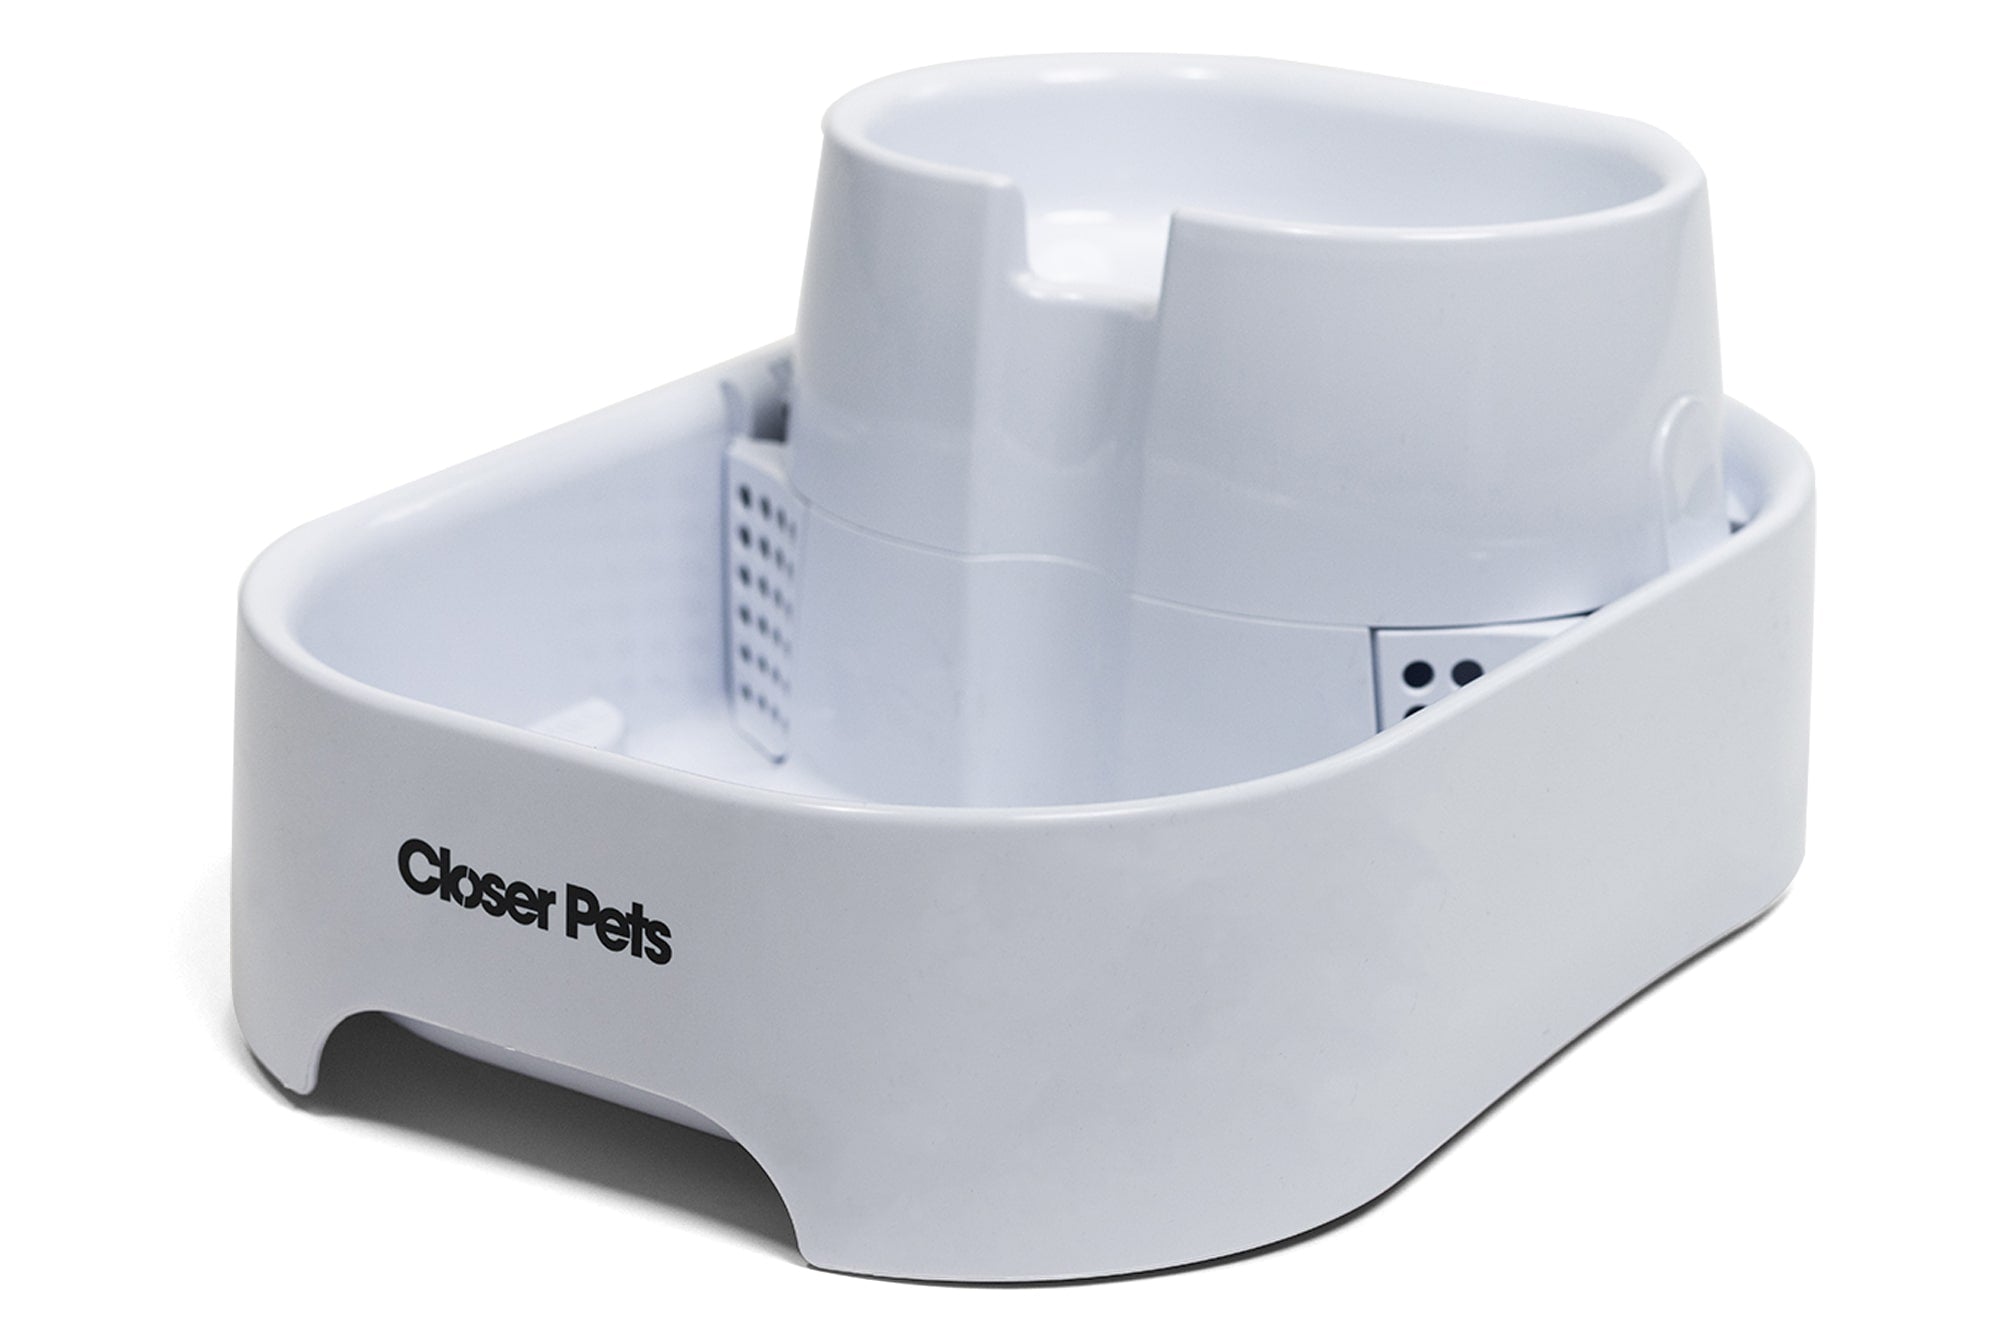 Closer Pets Large Two-level 200 fl. oz. Pet Fountain – White (CP 385)